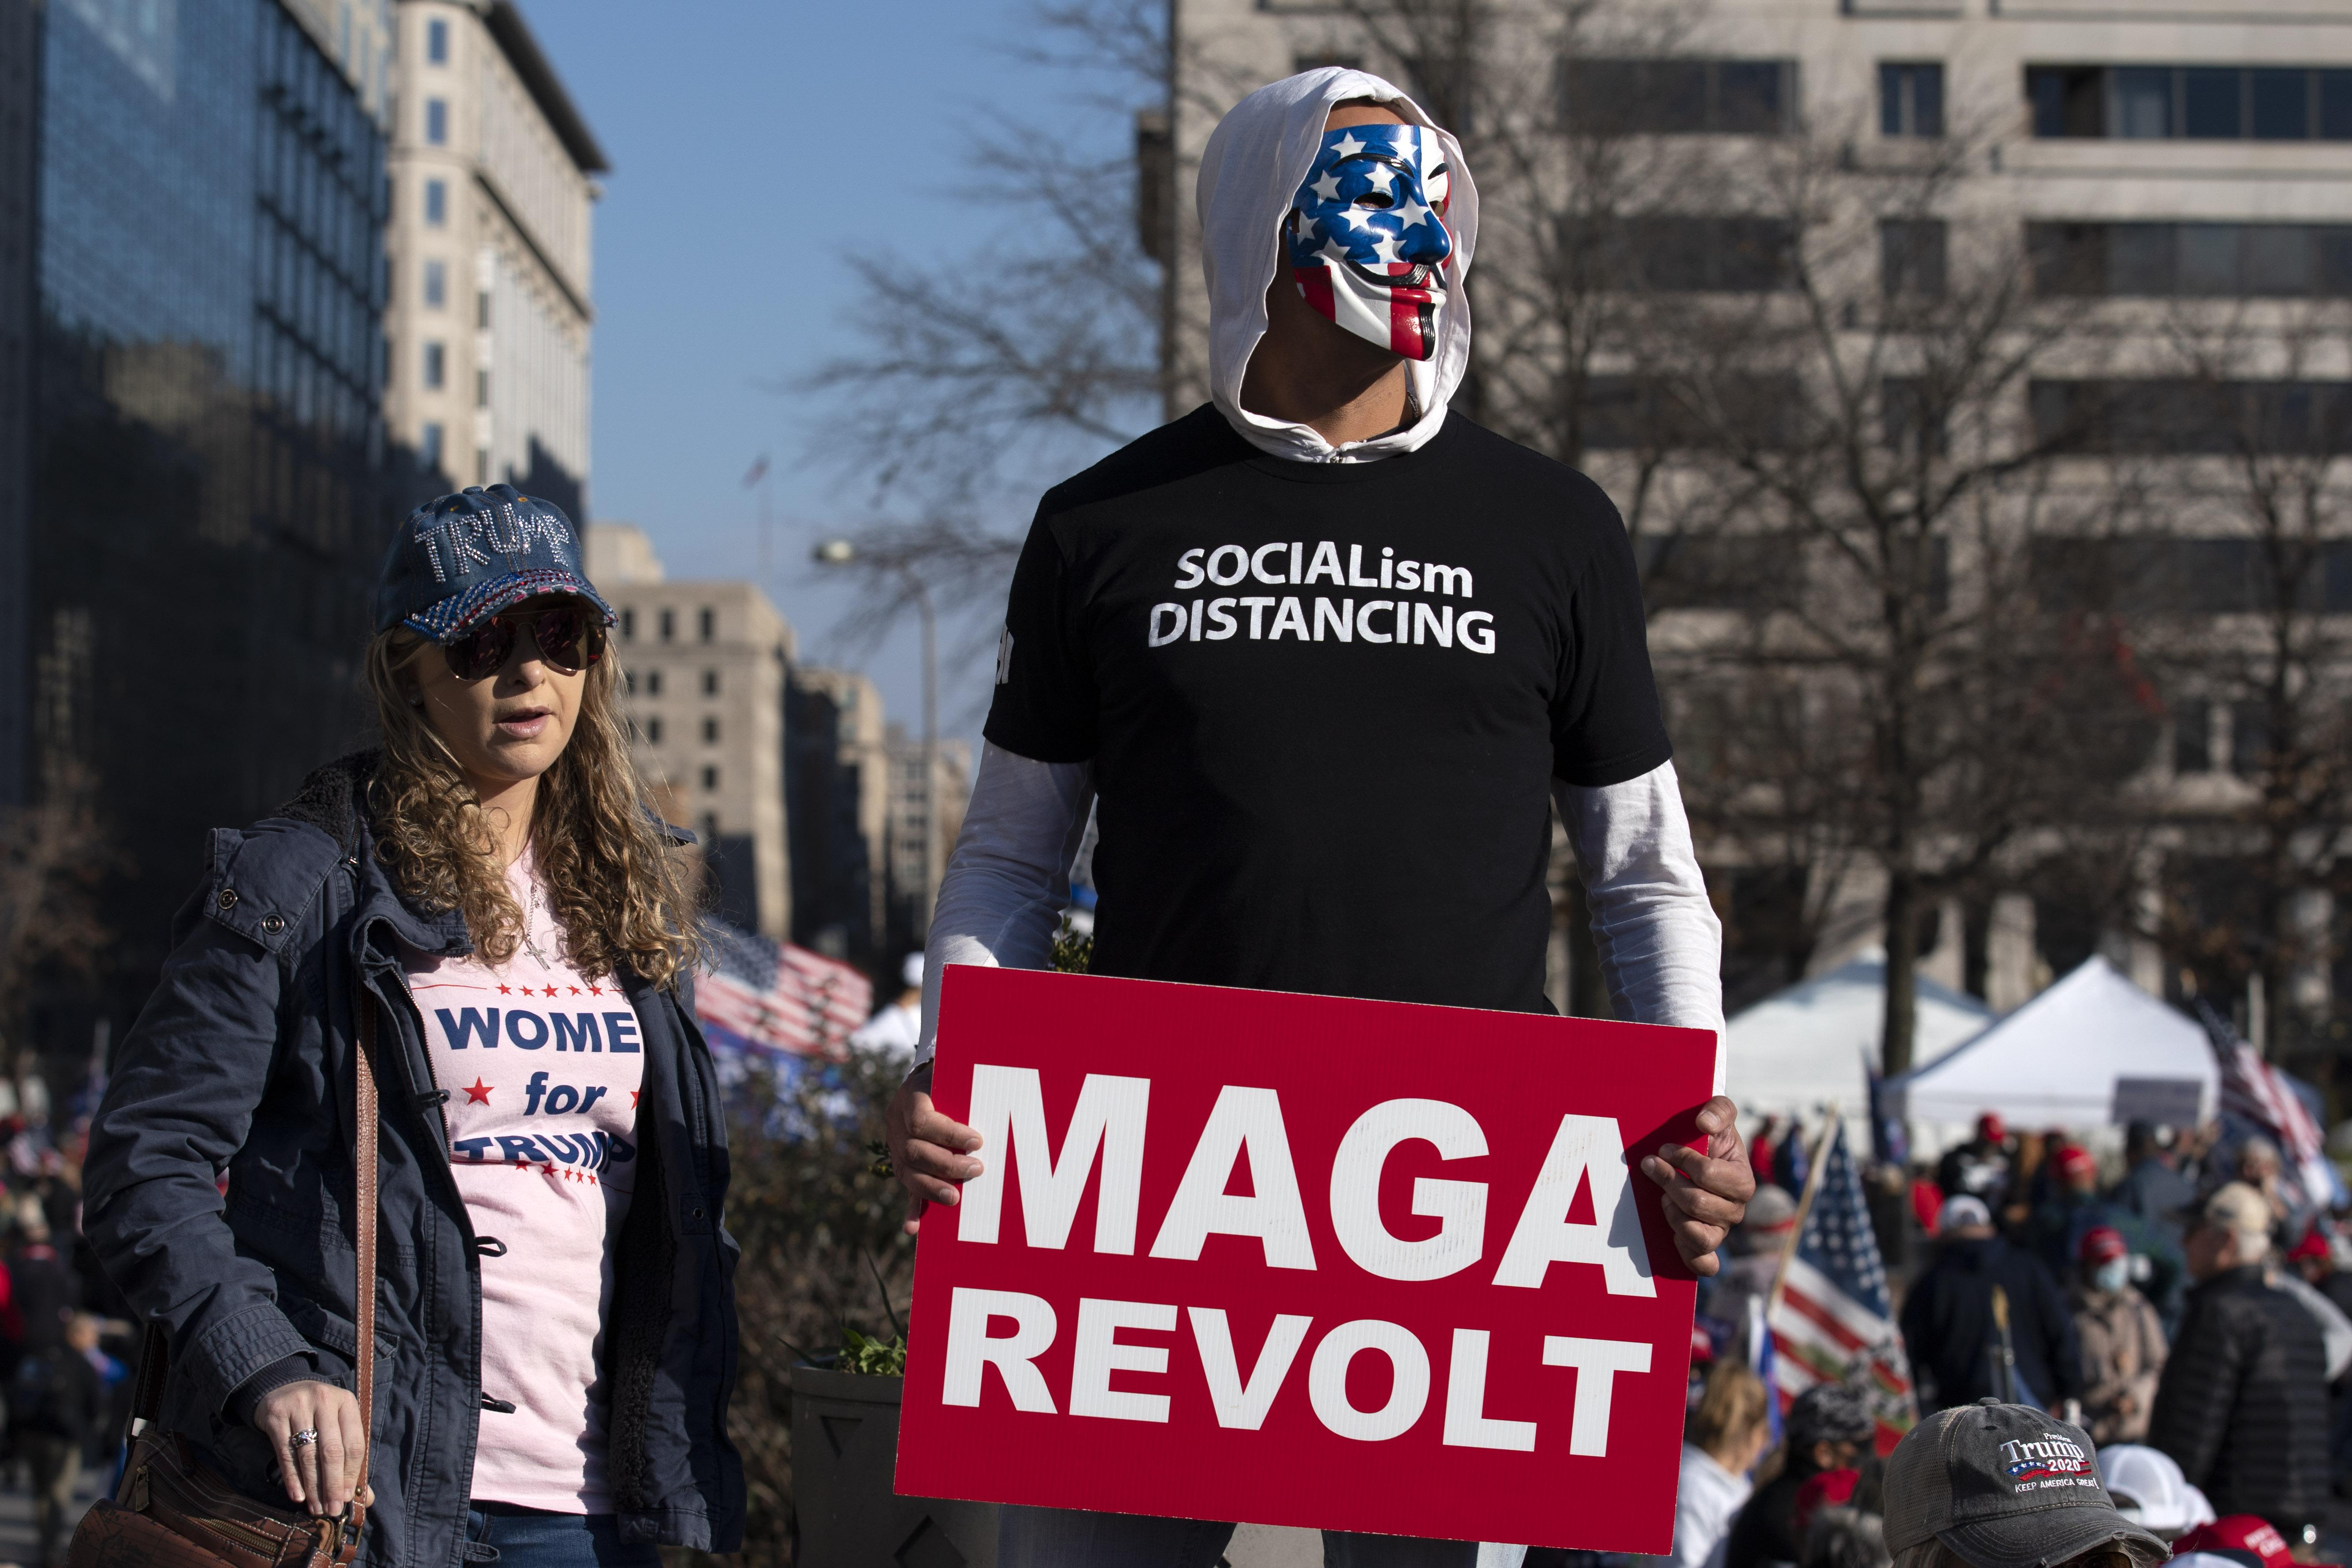 Supporters of President Donald Trump rally at Freedom Plaza to protest the outcome of the 2020 presidential election on December 12, 2020 in Washington, D.C.